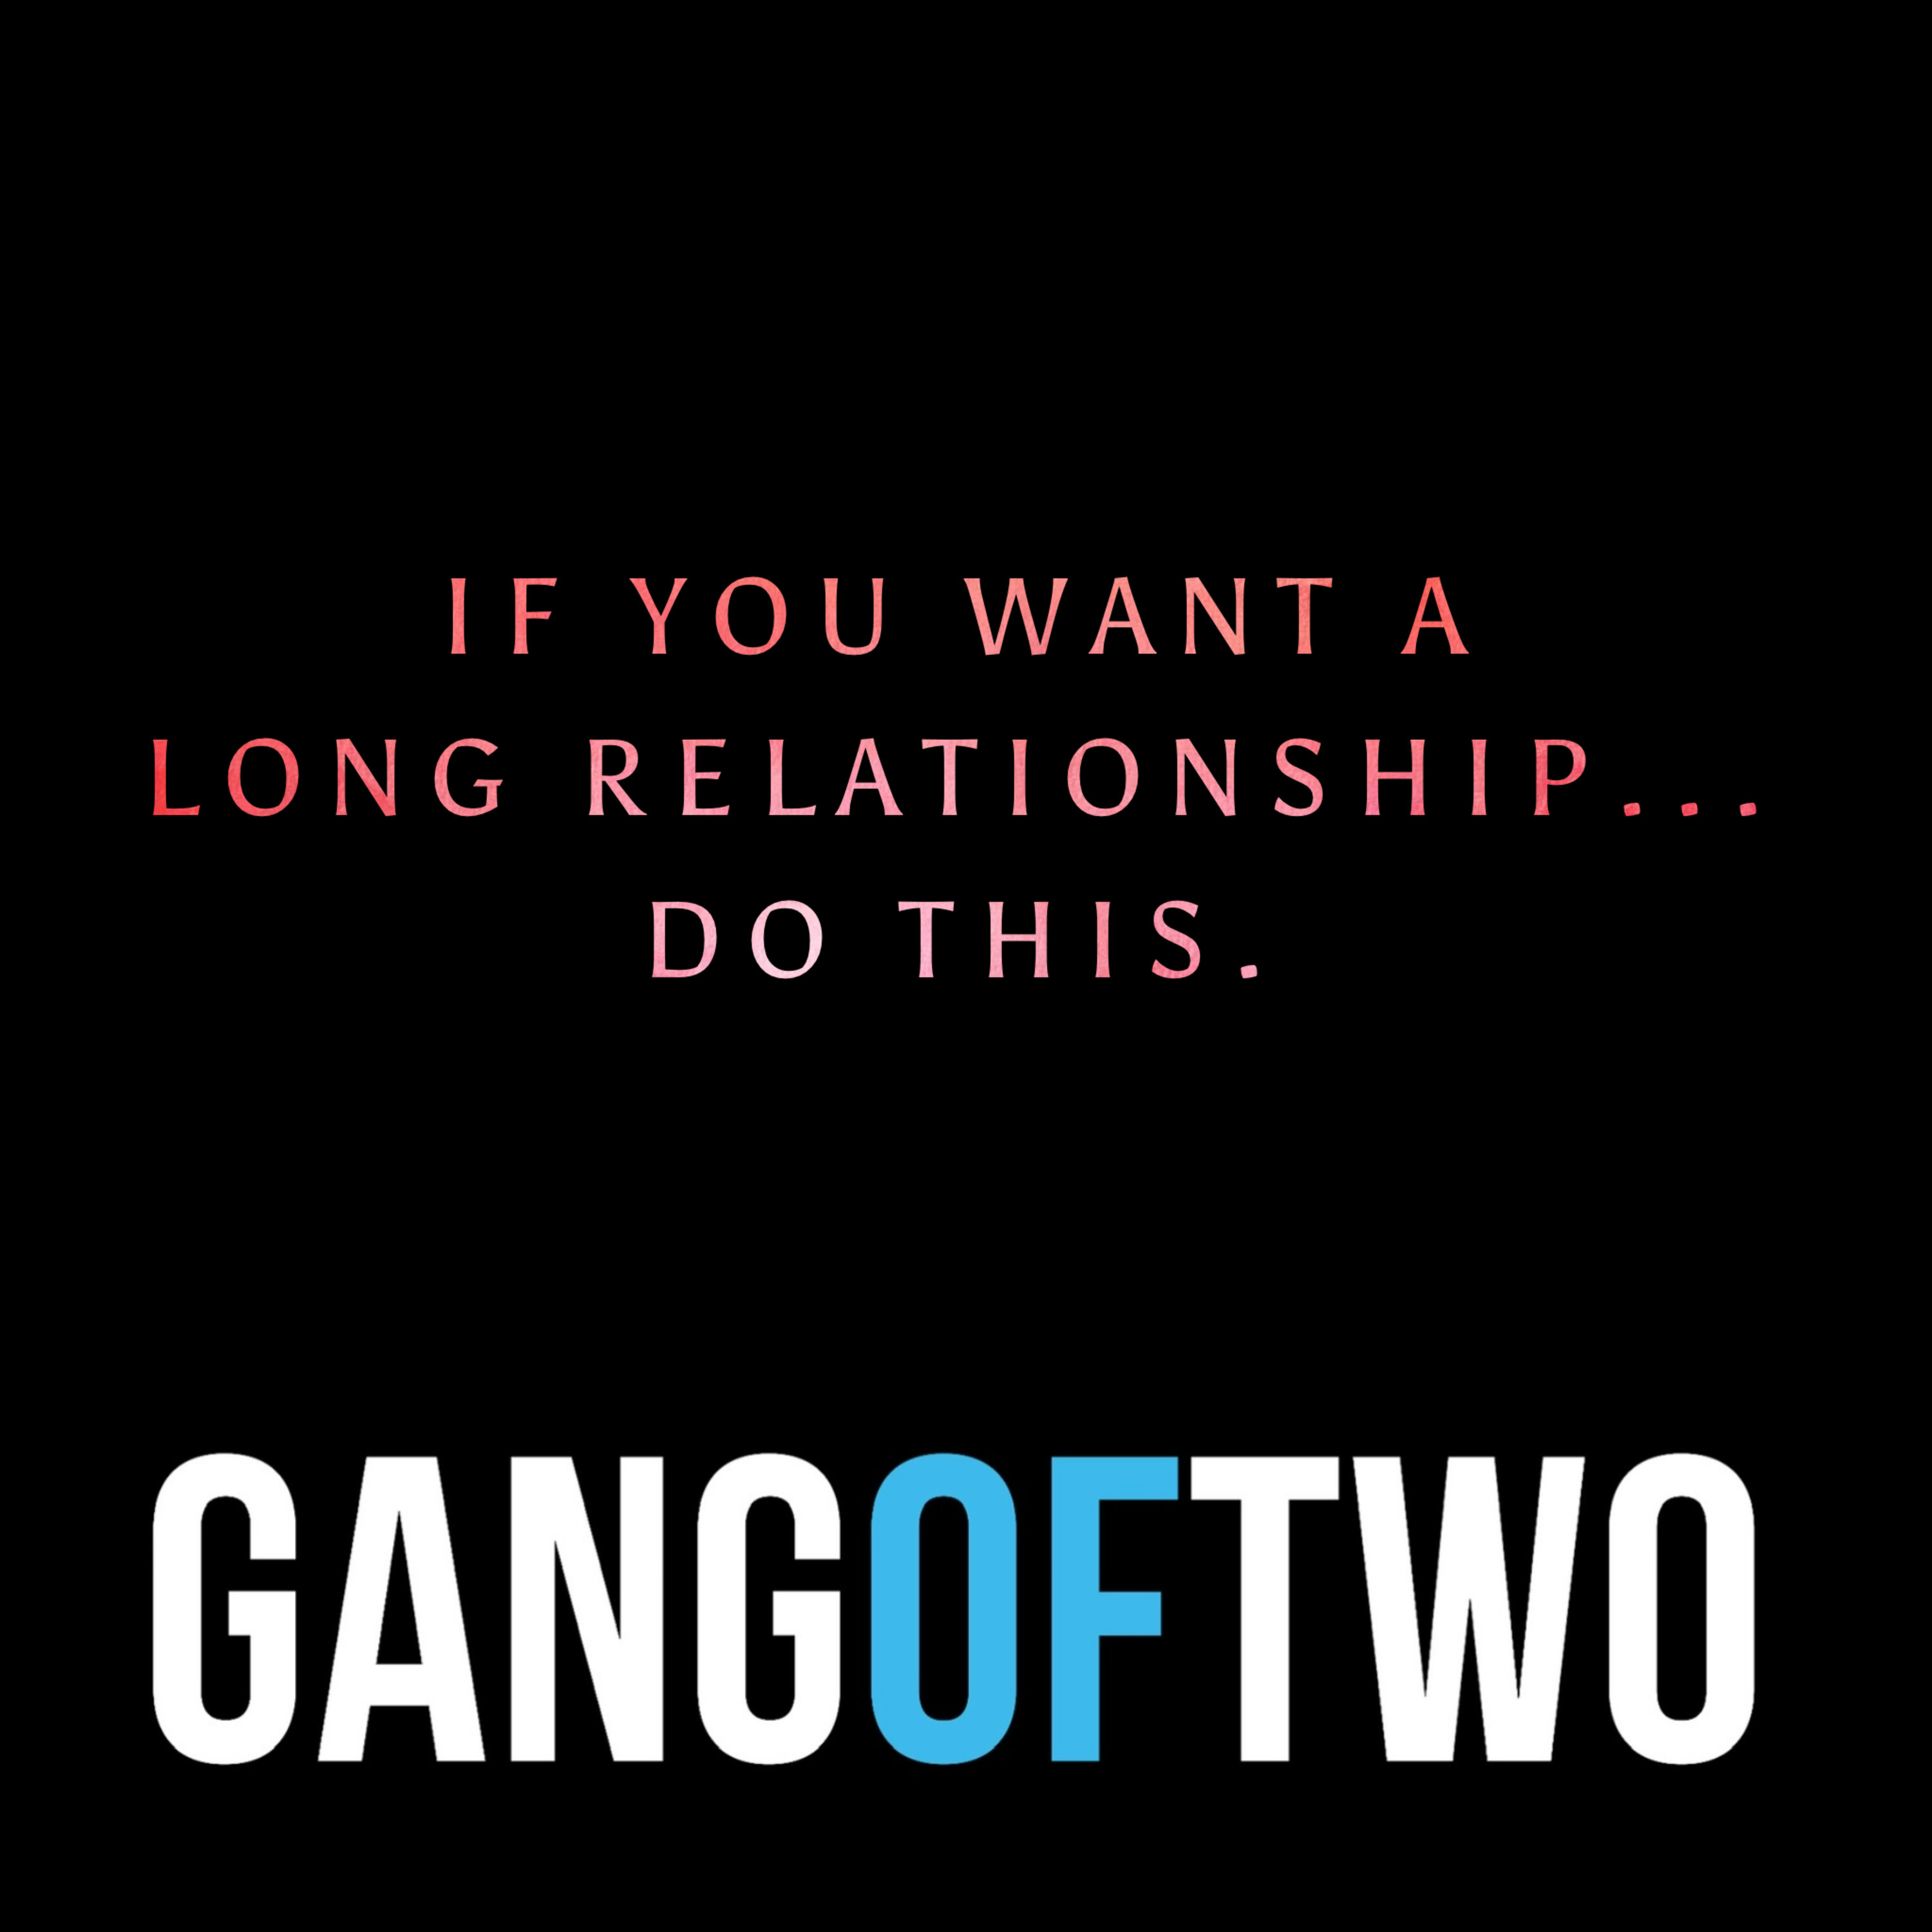 IF YOU WANT A LONG RELATIONSHIP ... DO THIS.